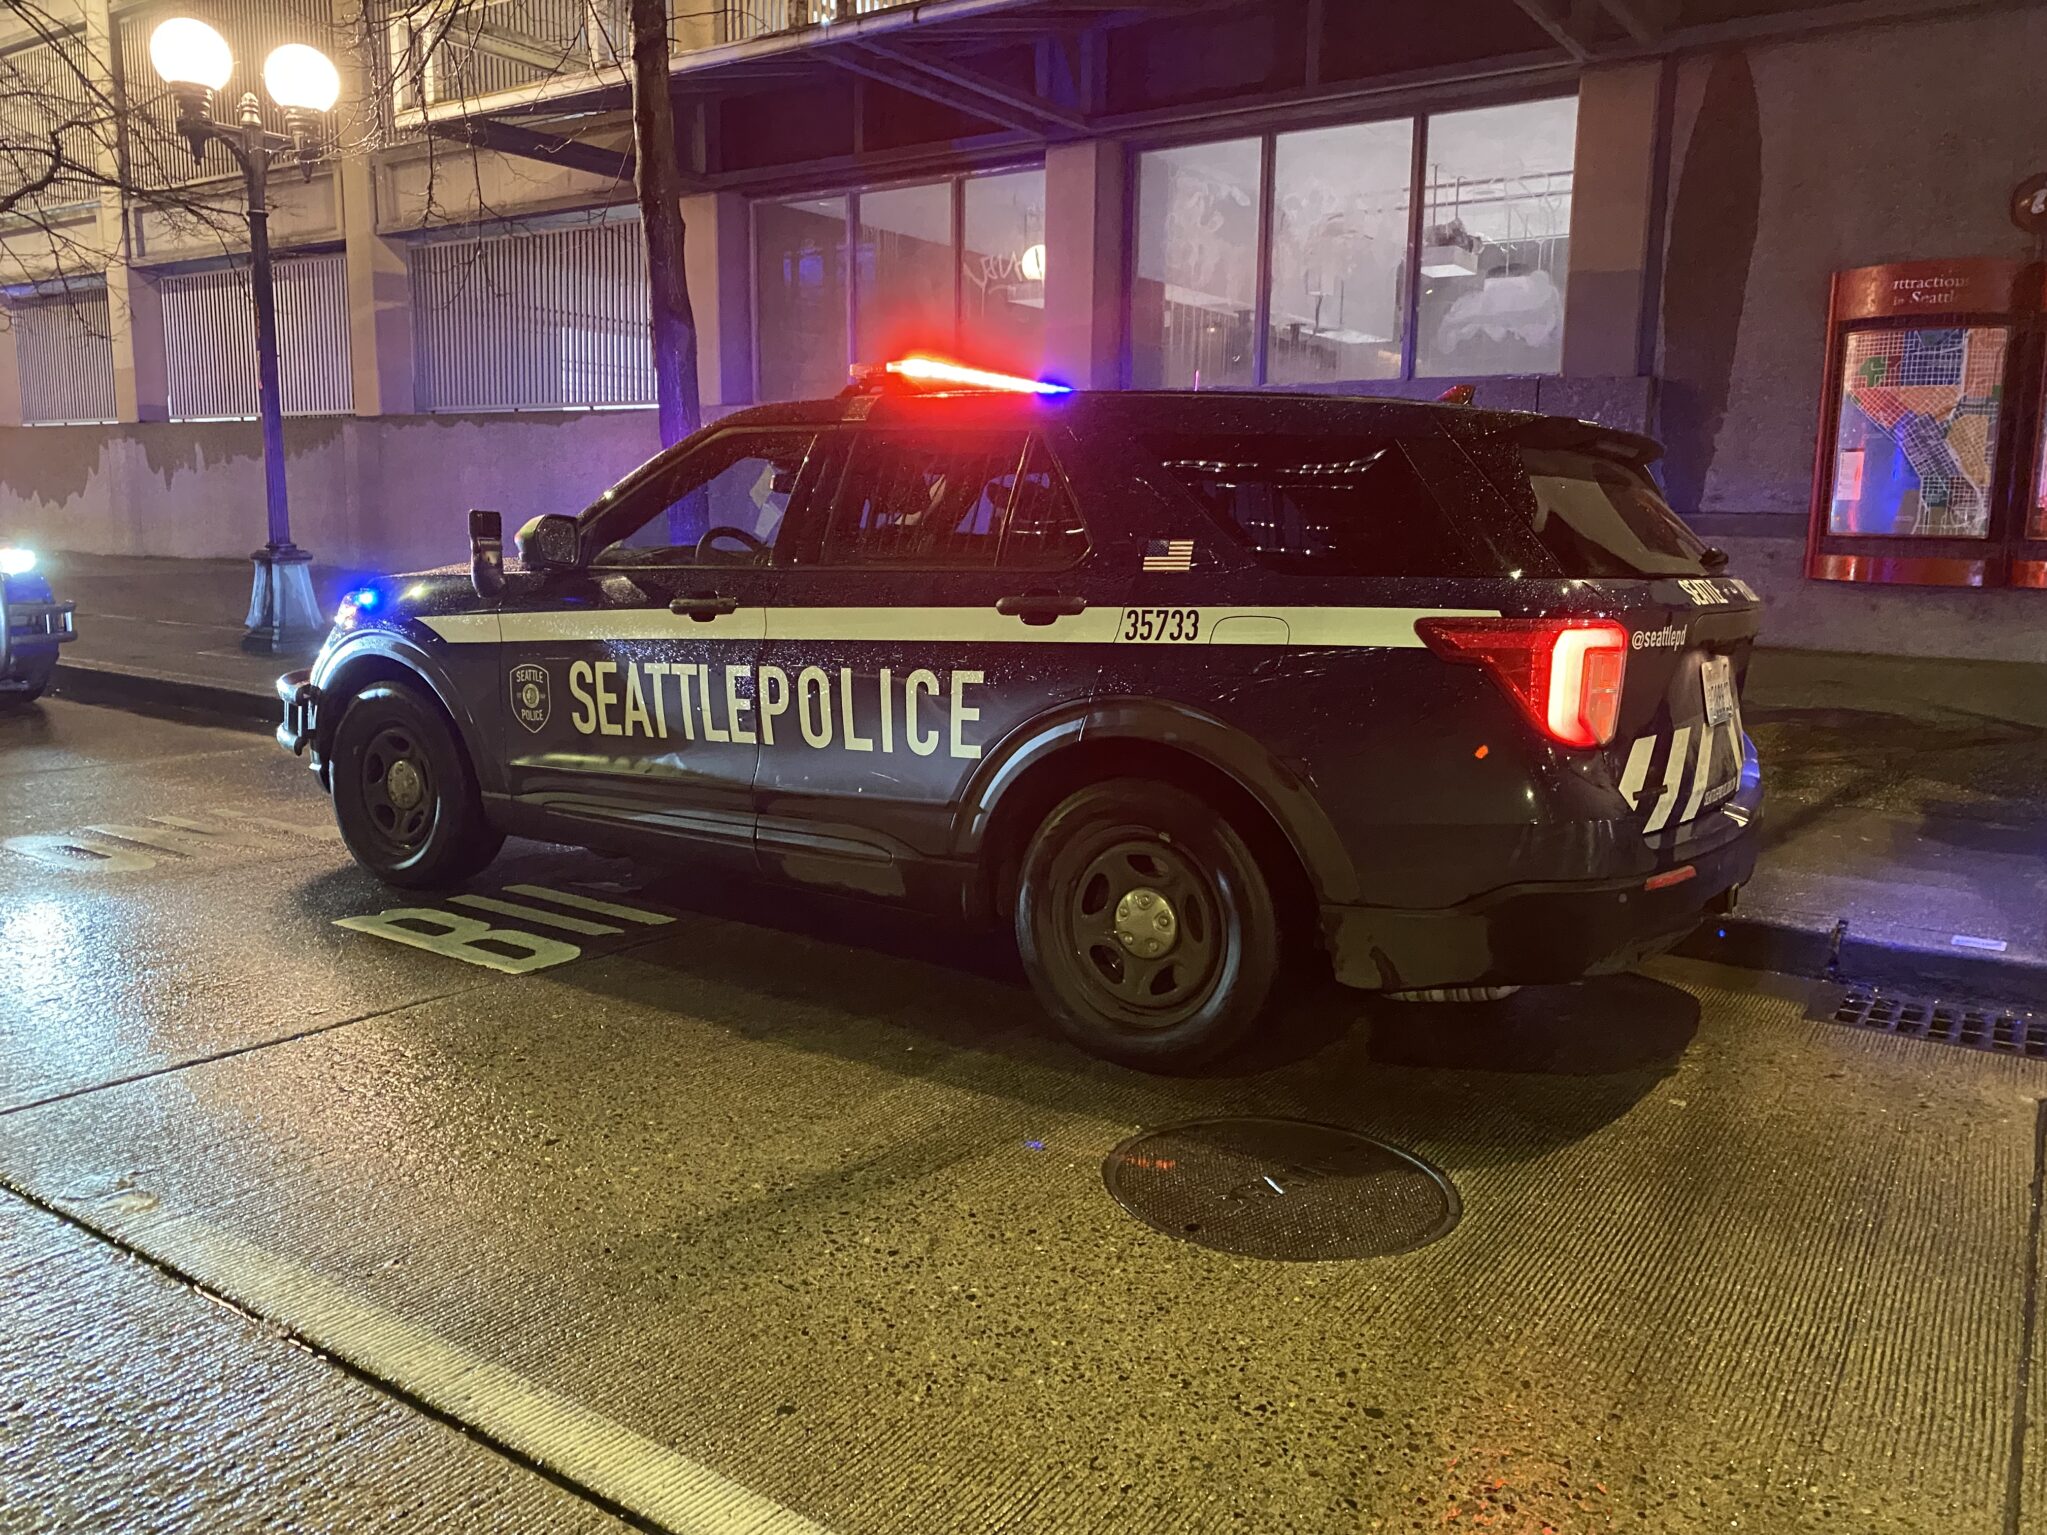 Detectives Investigate Fatal Shooting on Link Light Rail in Downtown Seattle